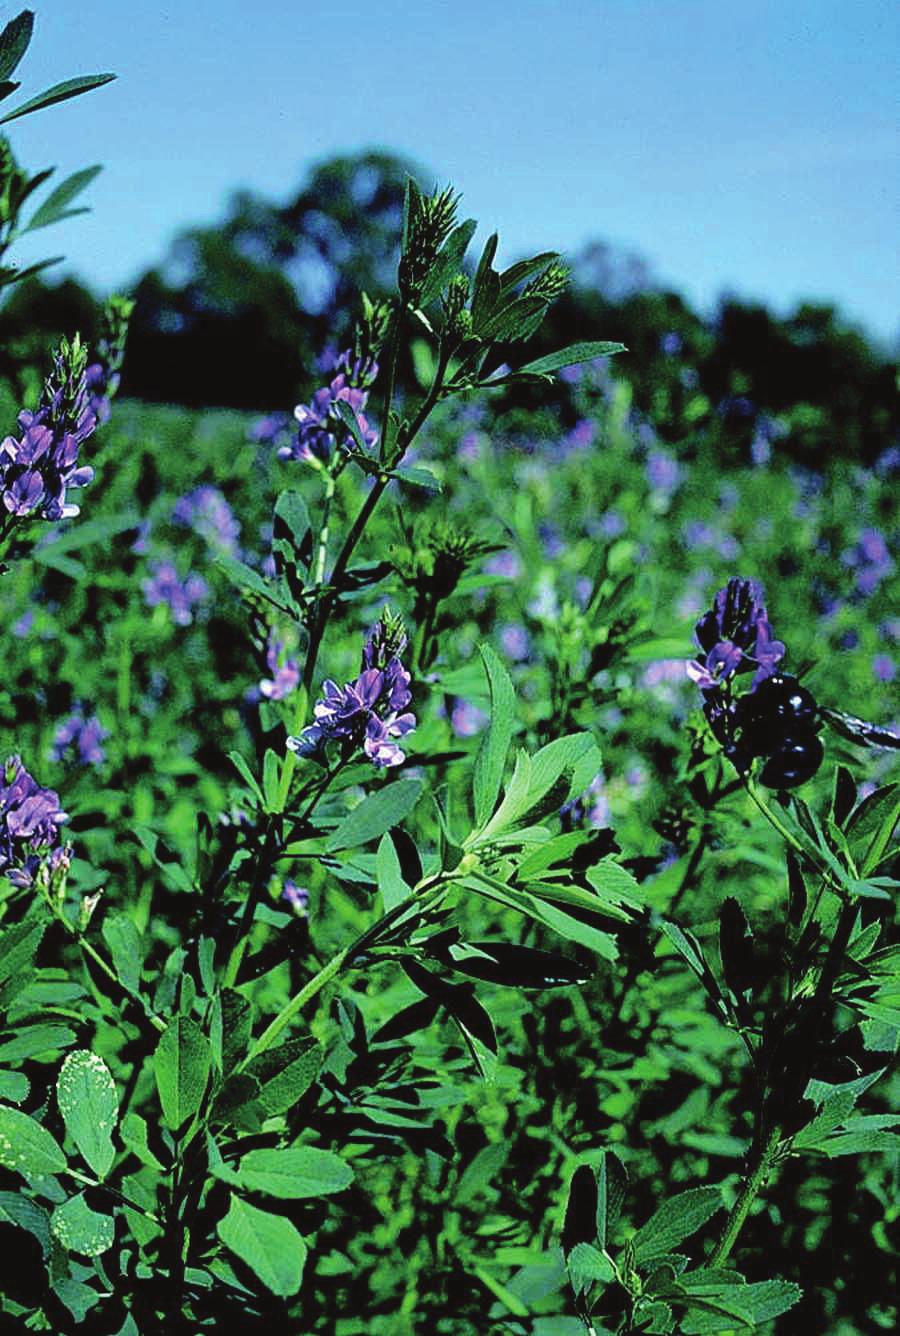 Alfalfa may be planted from October 1 to November 15 when soil moisture is adequate for good germination.